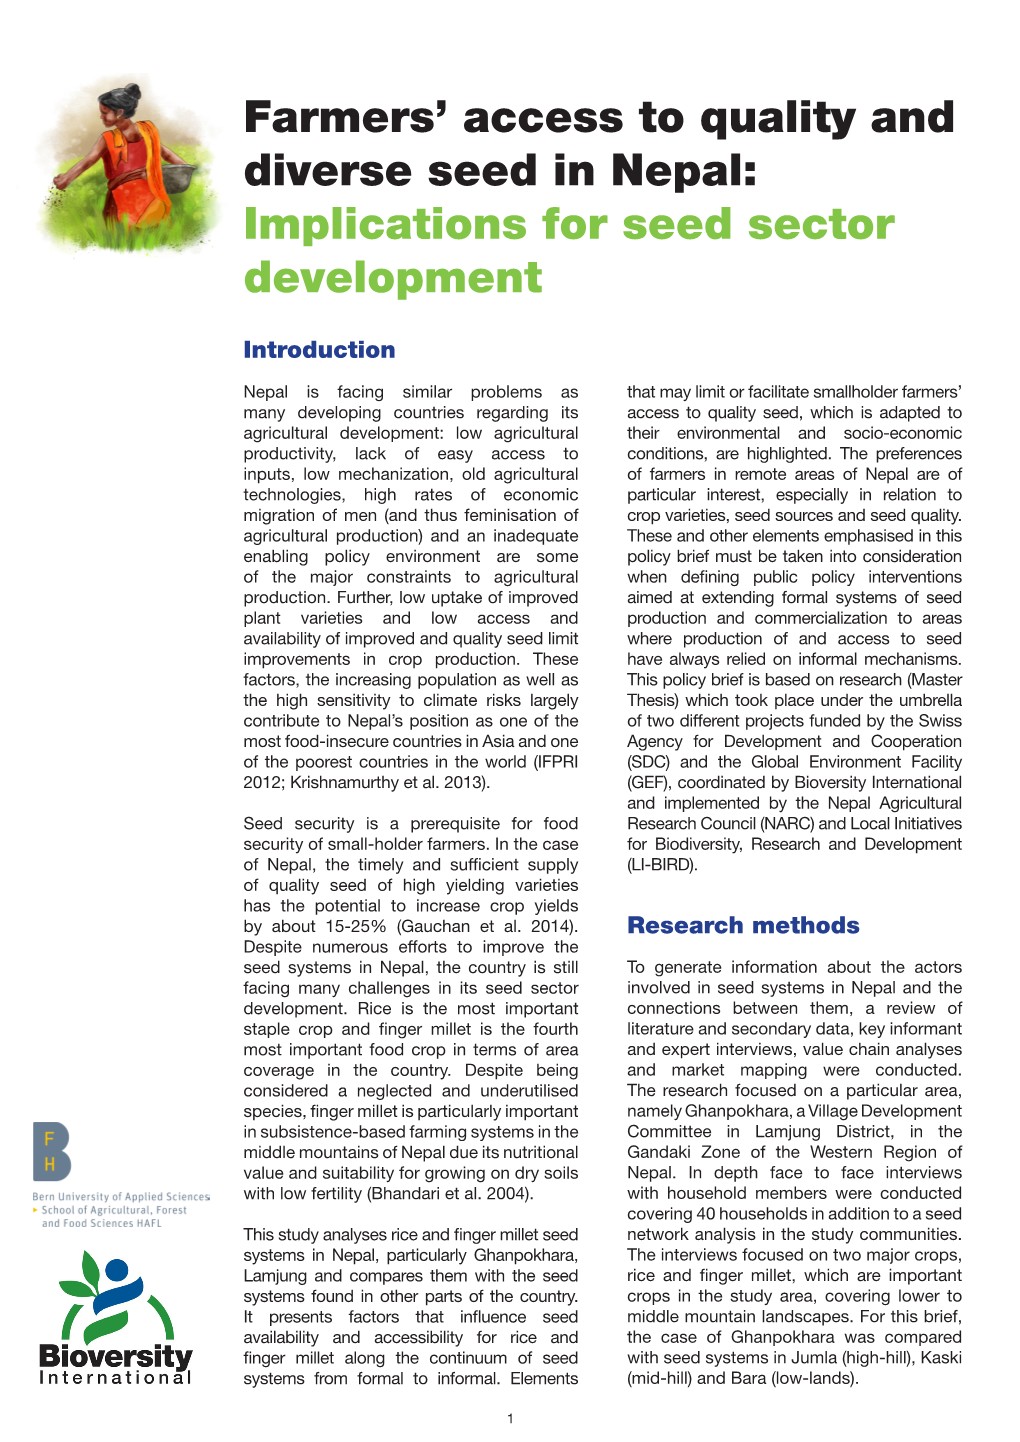 Farmers' Access to Quality and Diverse Seed in Nepal